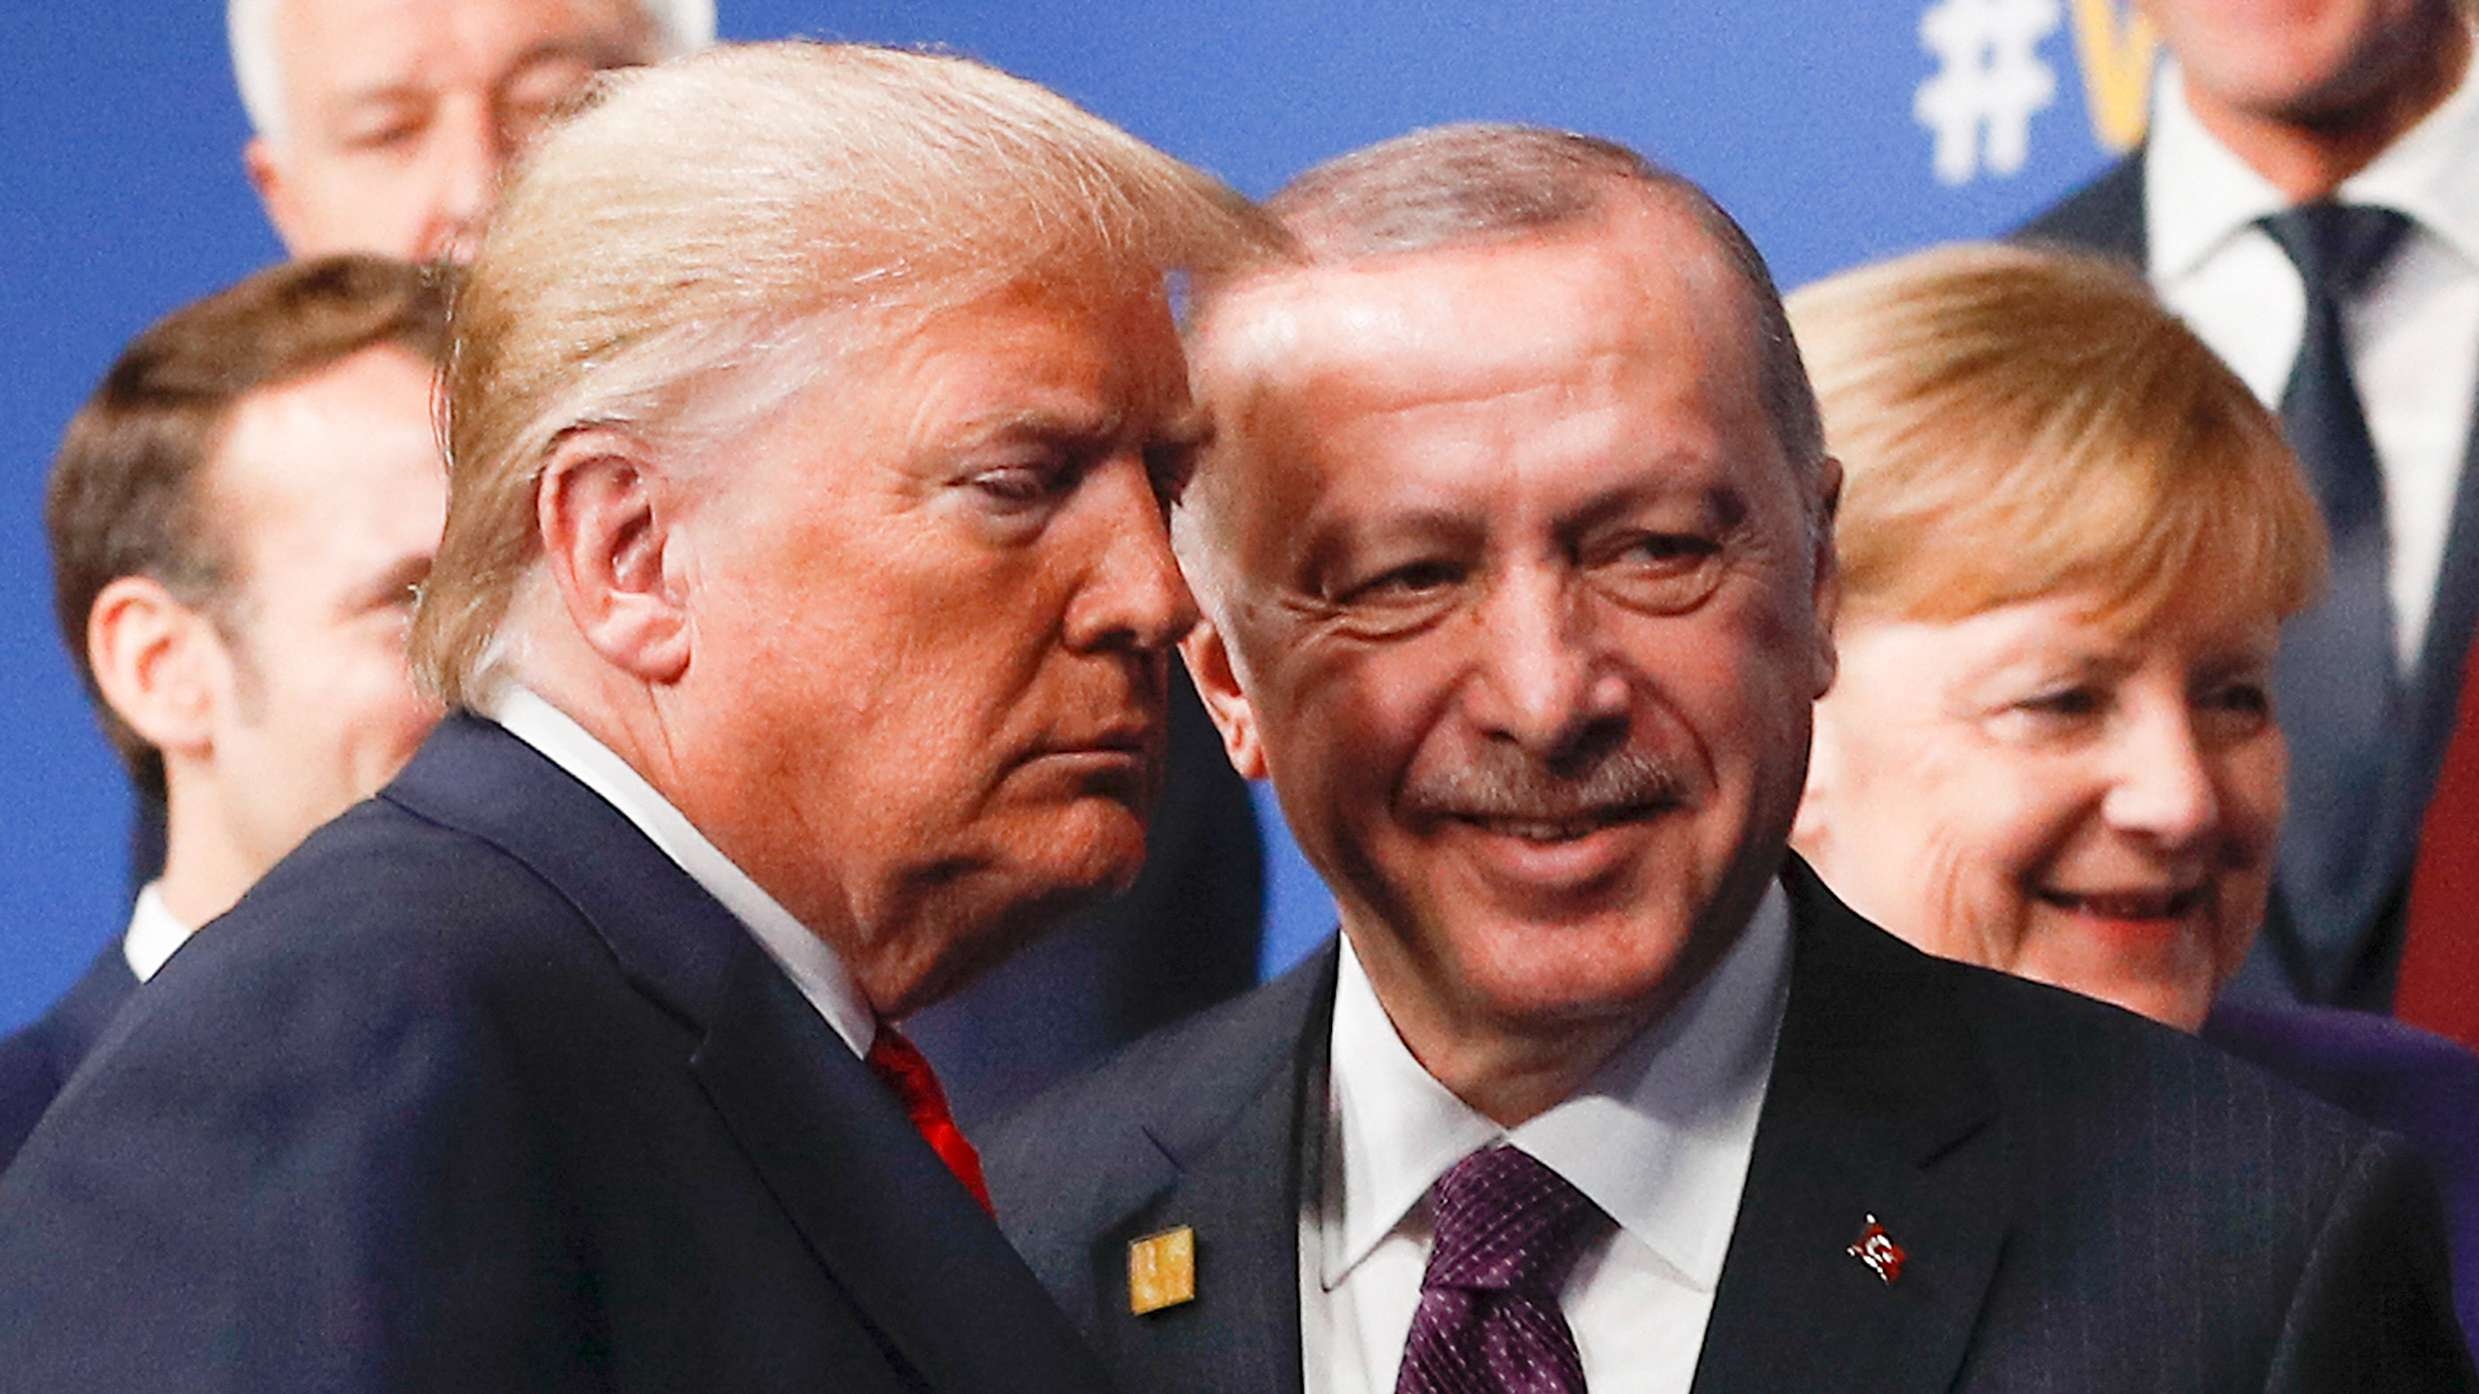 Trump previously said that Erdogan was a 'highly respected' world leader